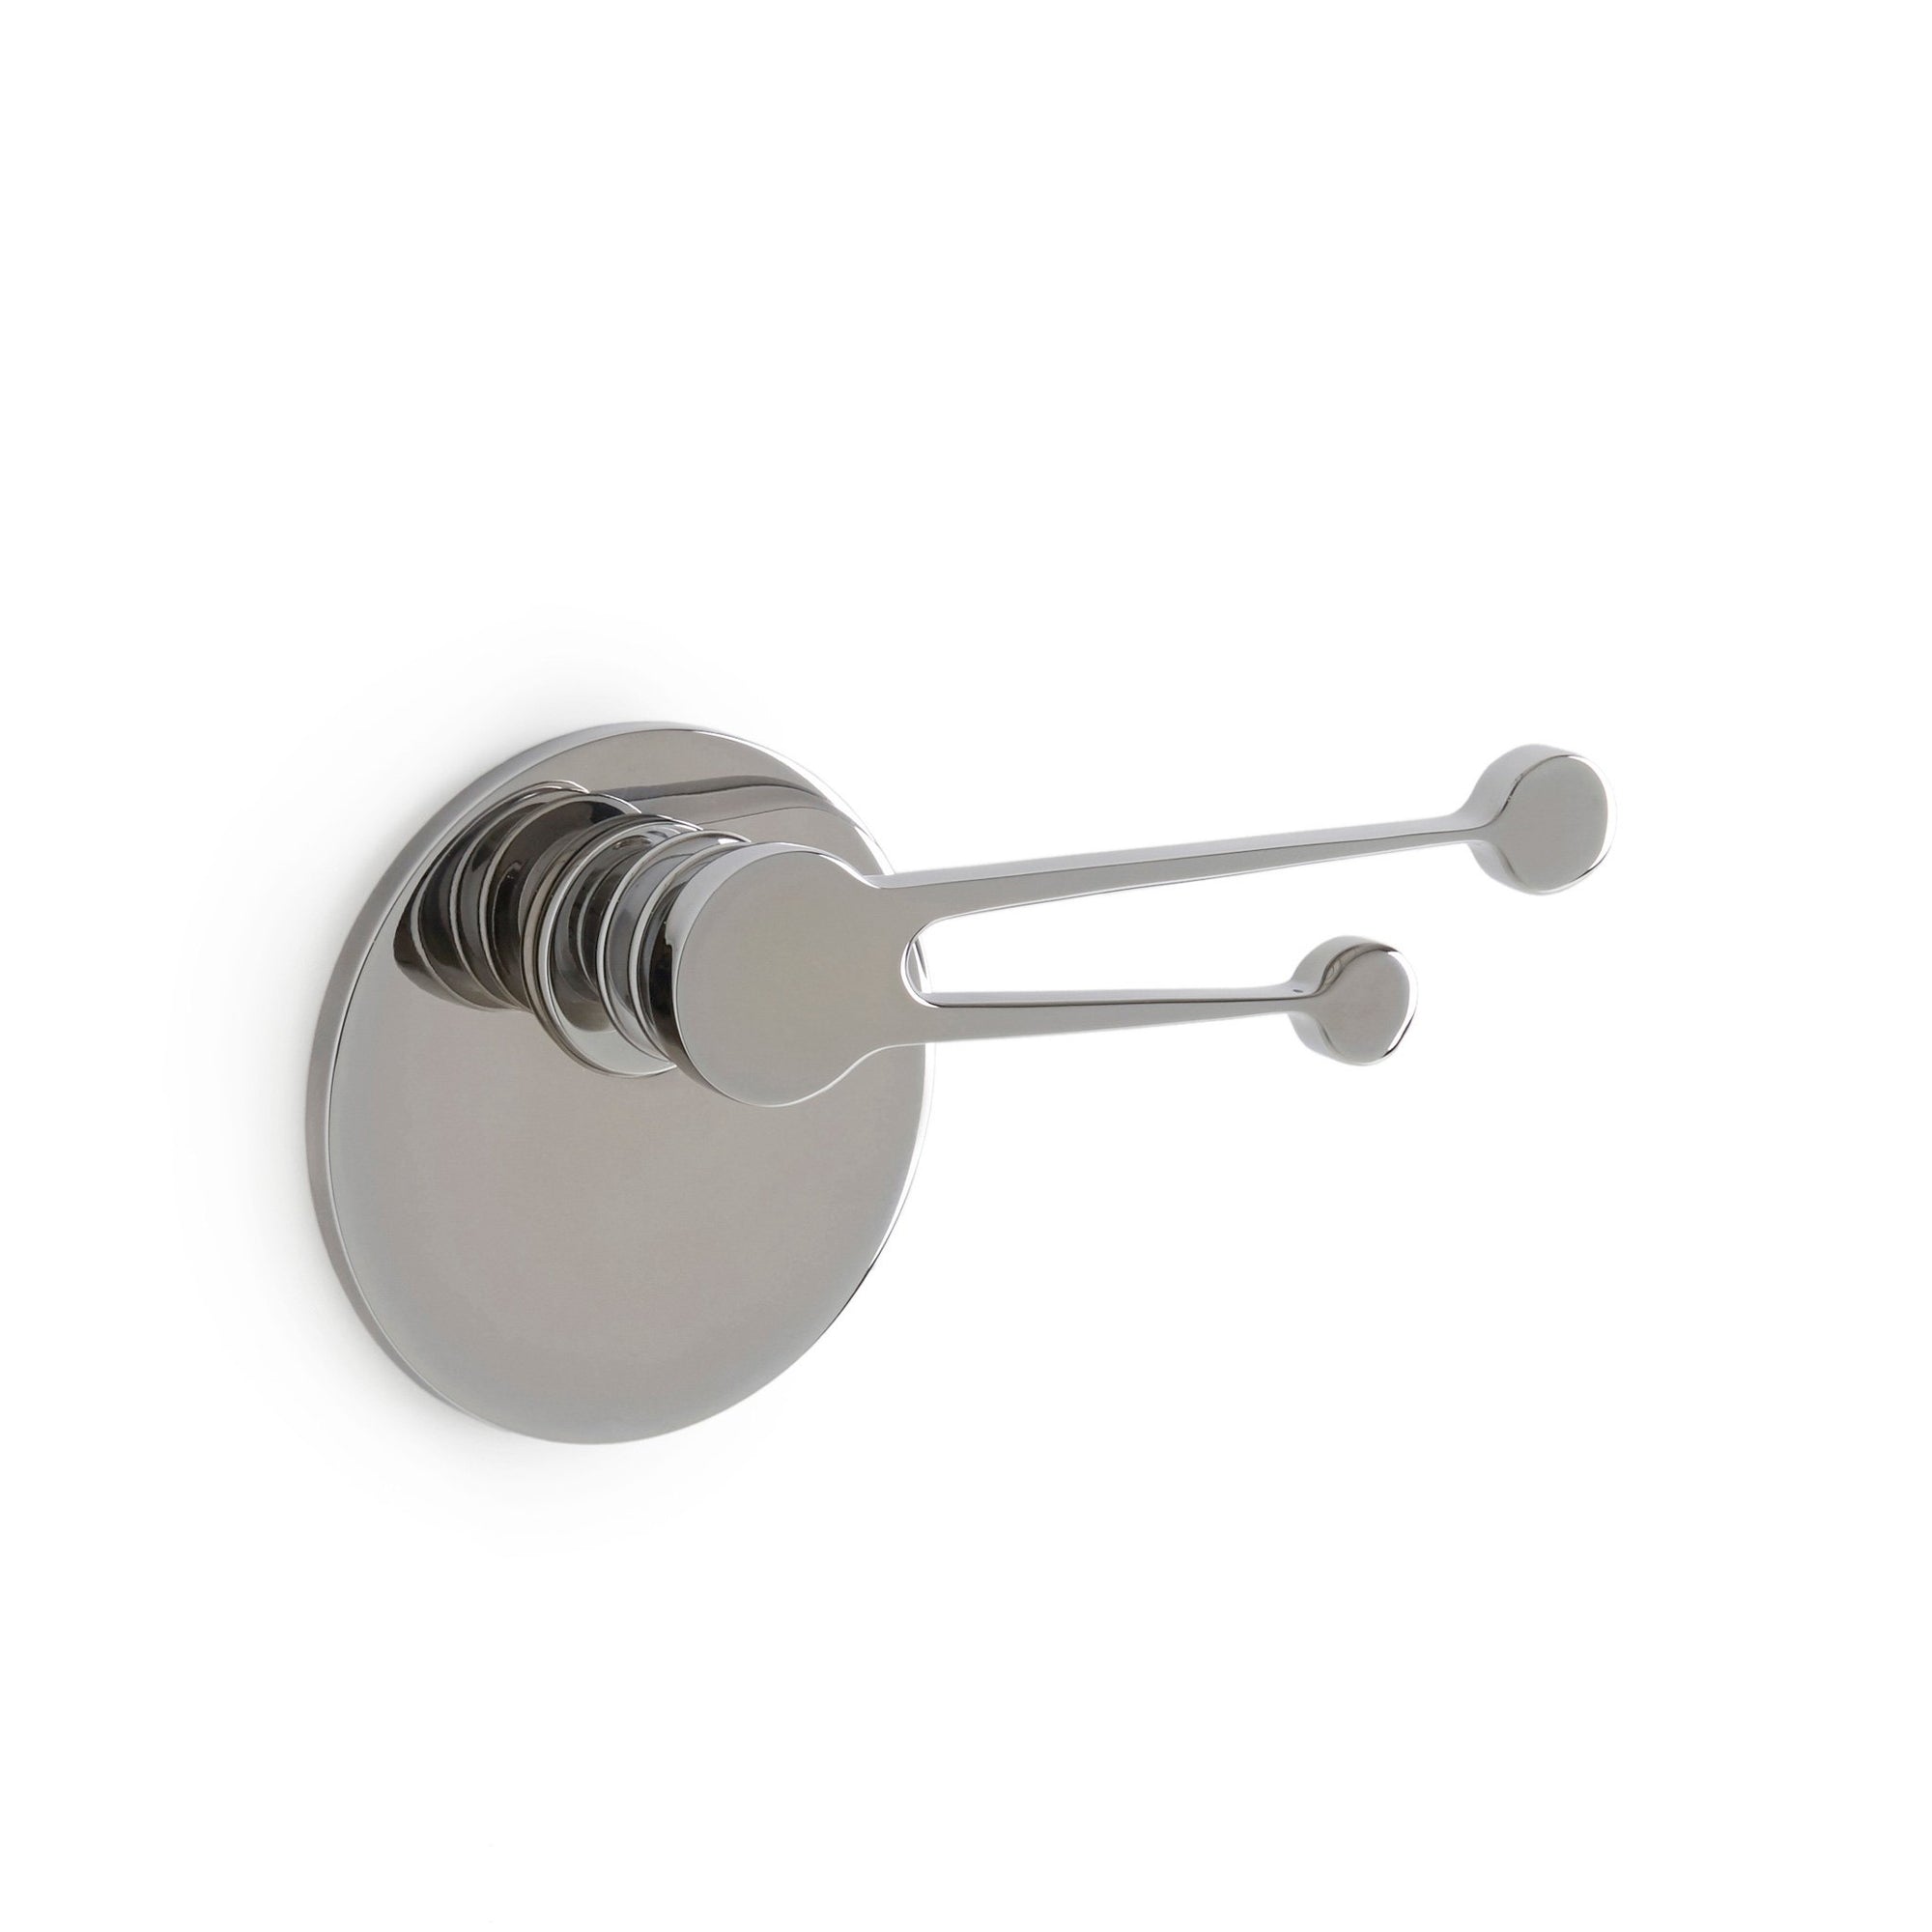 2008DOR-RH-CP Sherle Wagner International Cosmos Door Lever in Polished Chrome metal finish